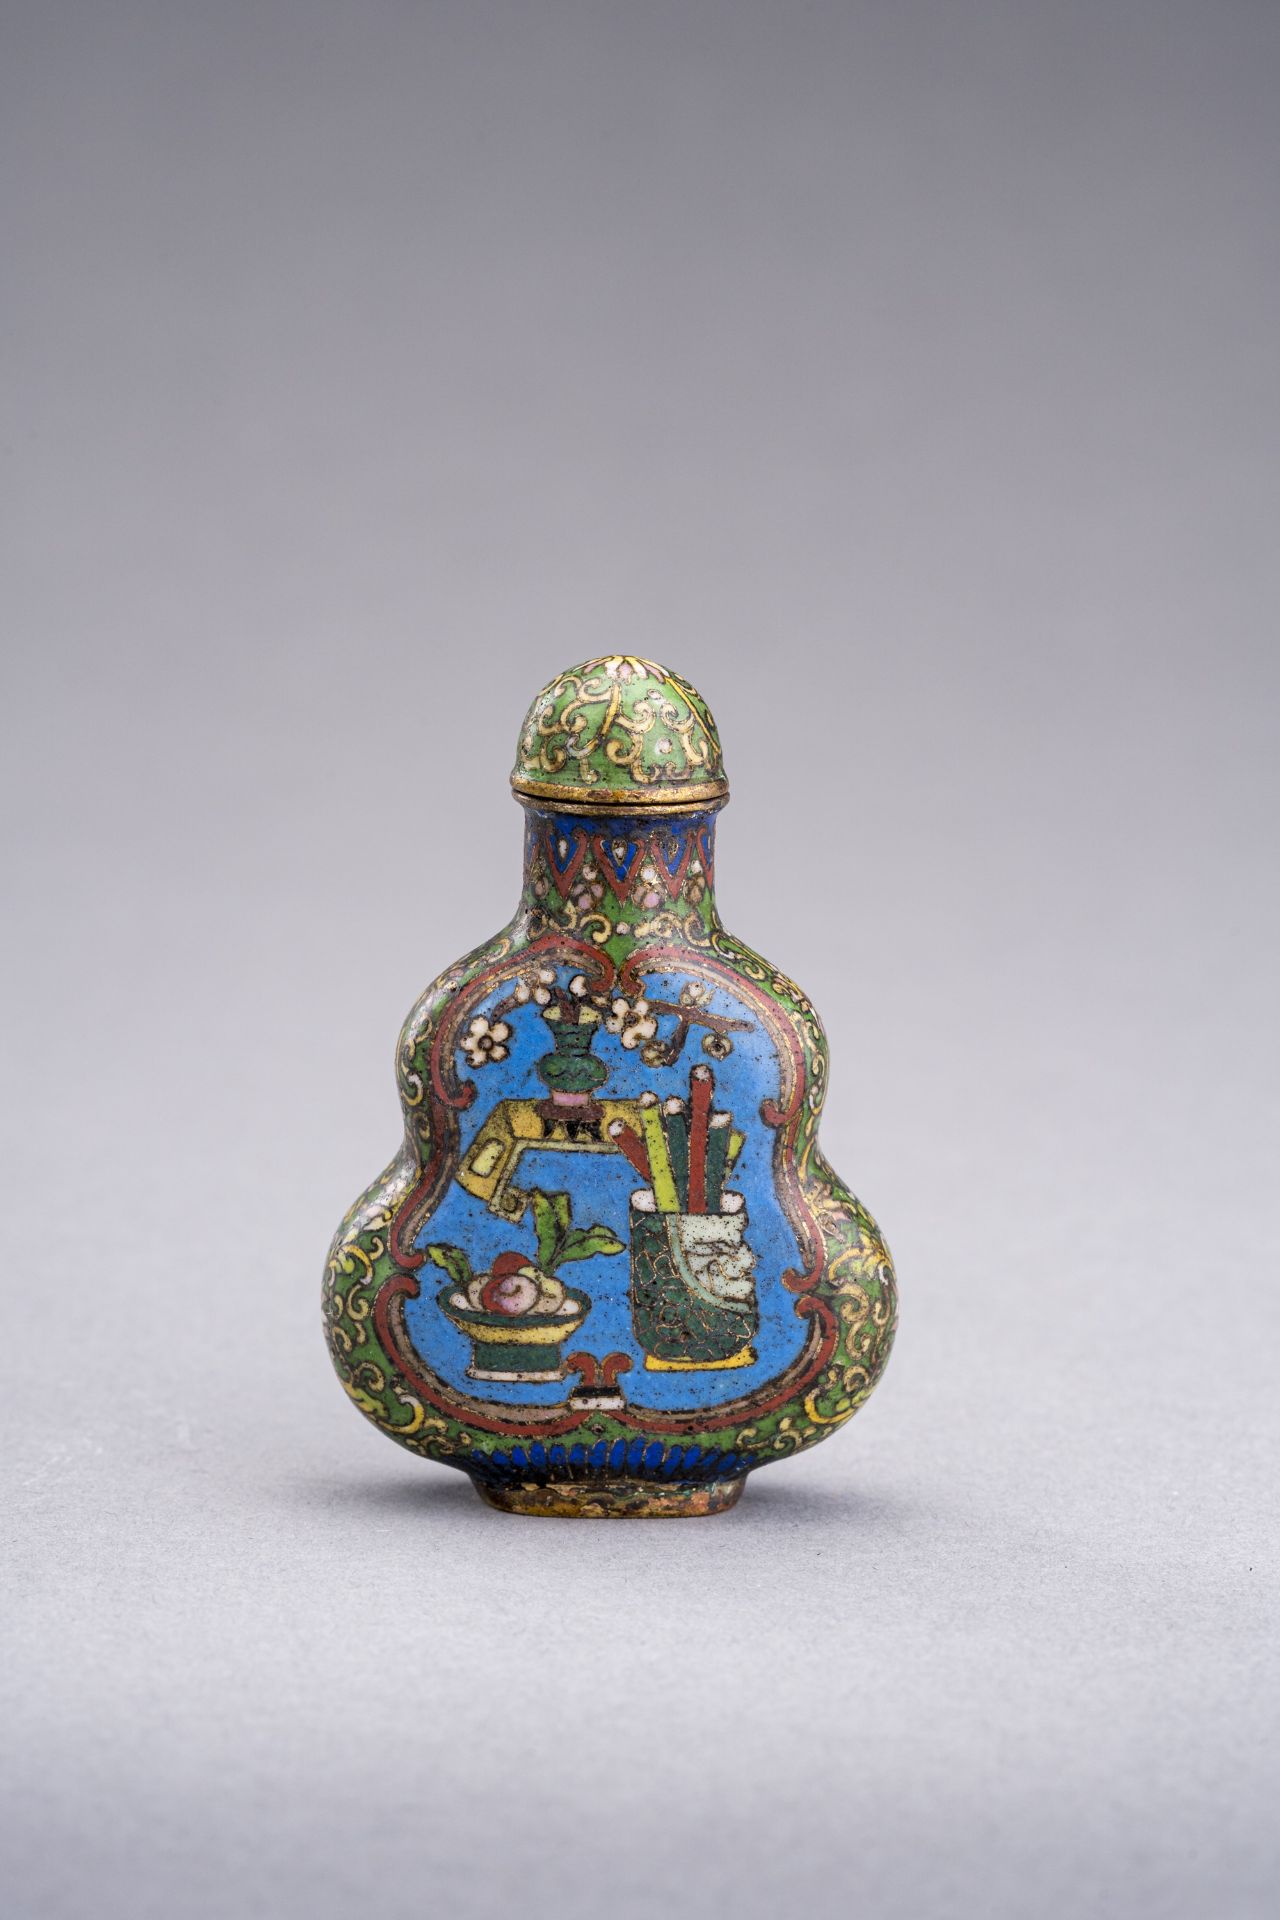 A DOUBLE-GOURD CLOISSONNE SNUFF BOTTLE, QING DYNASTY - Image 3 of 6